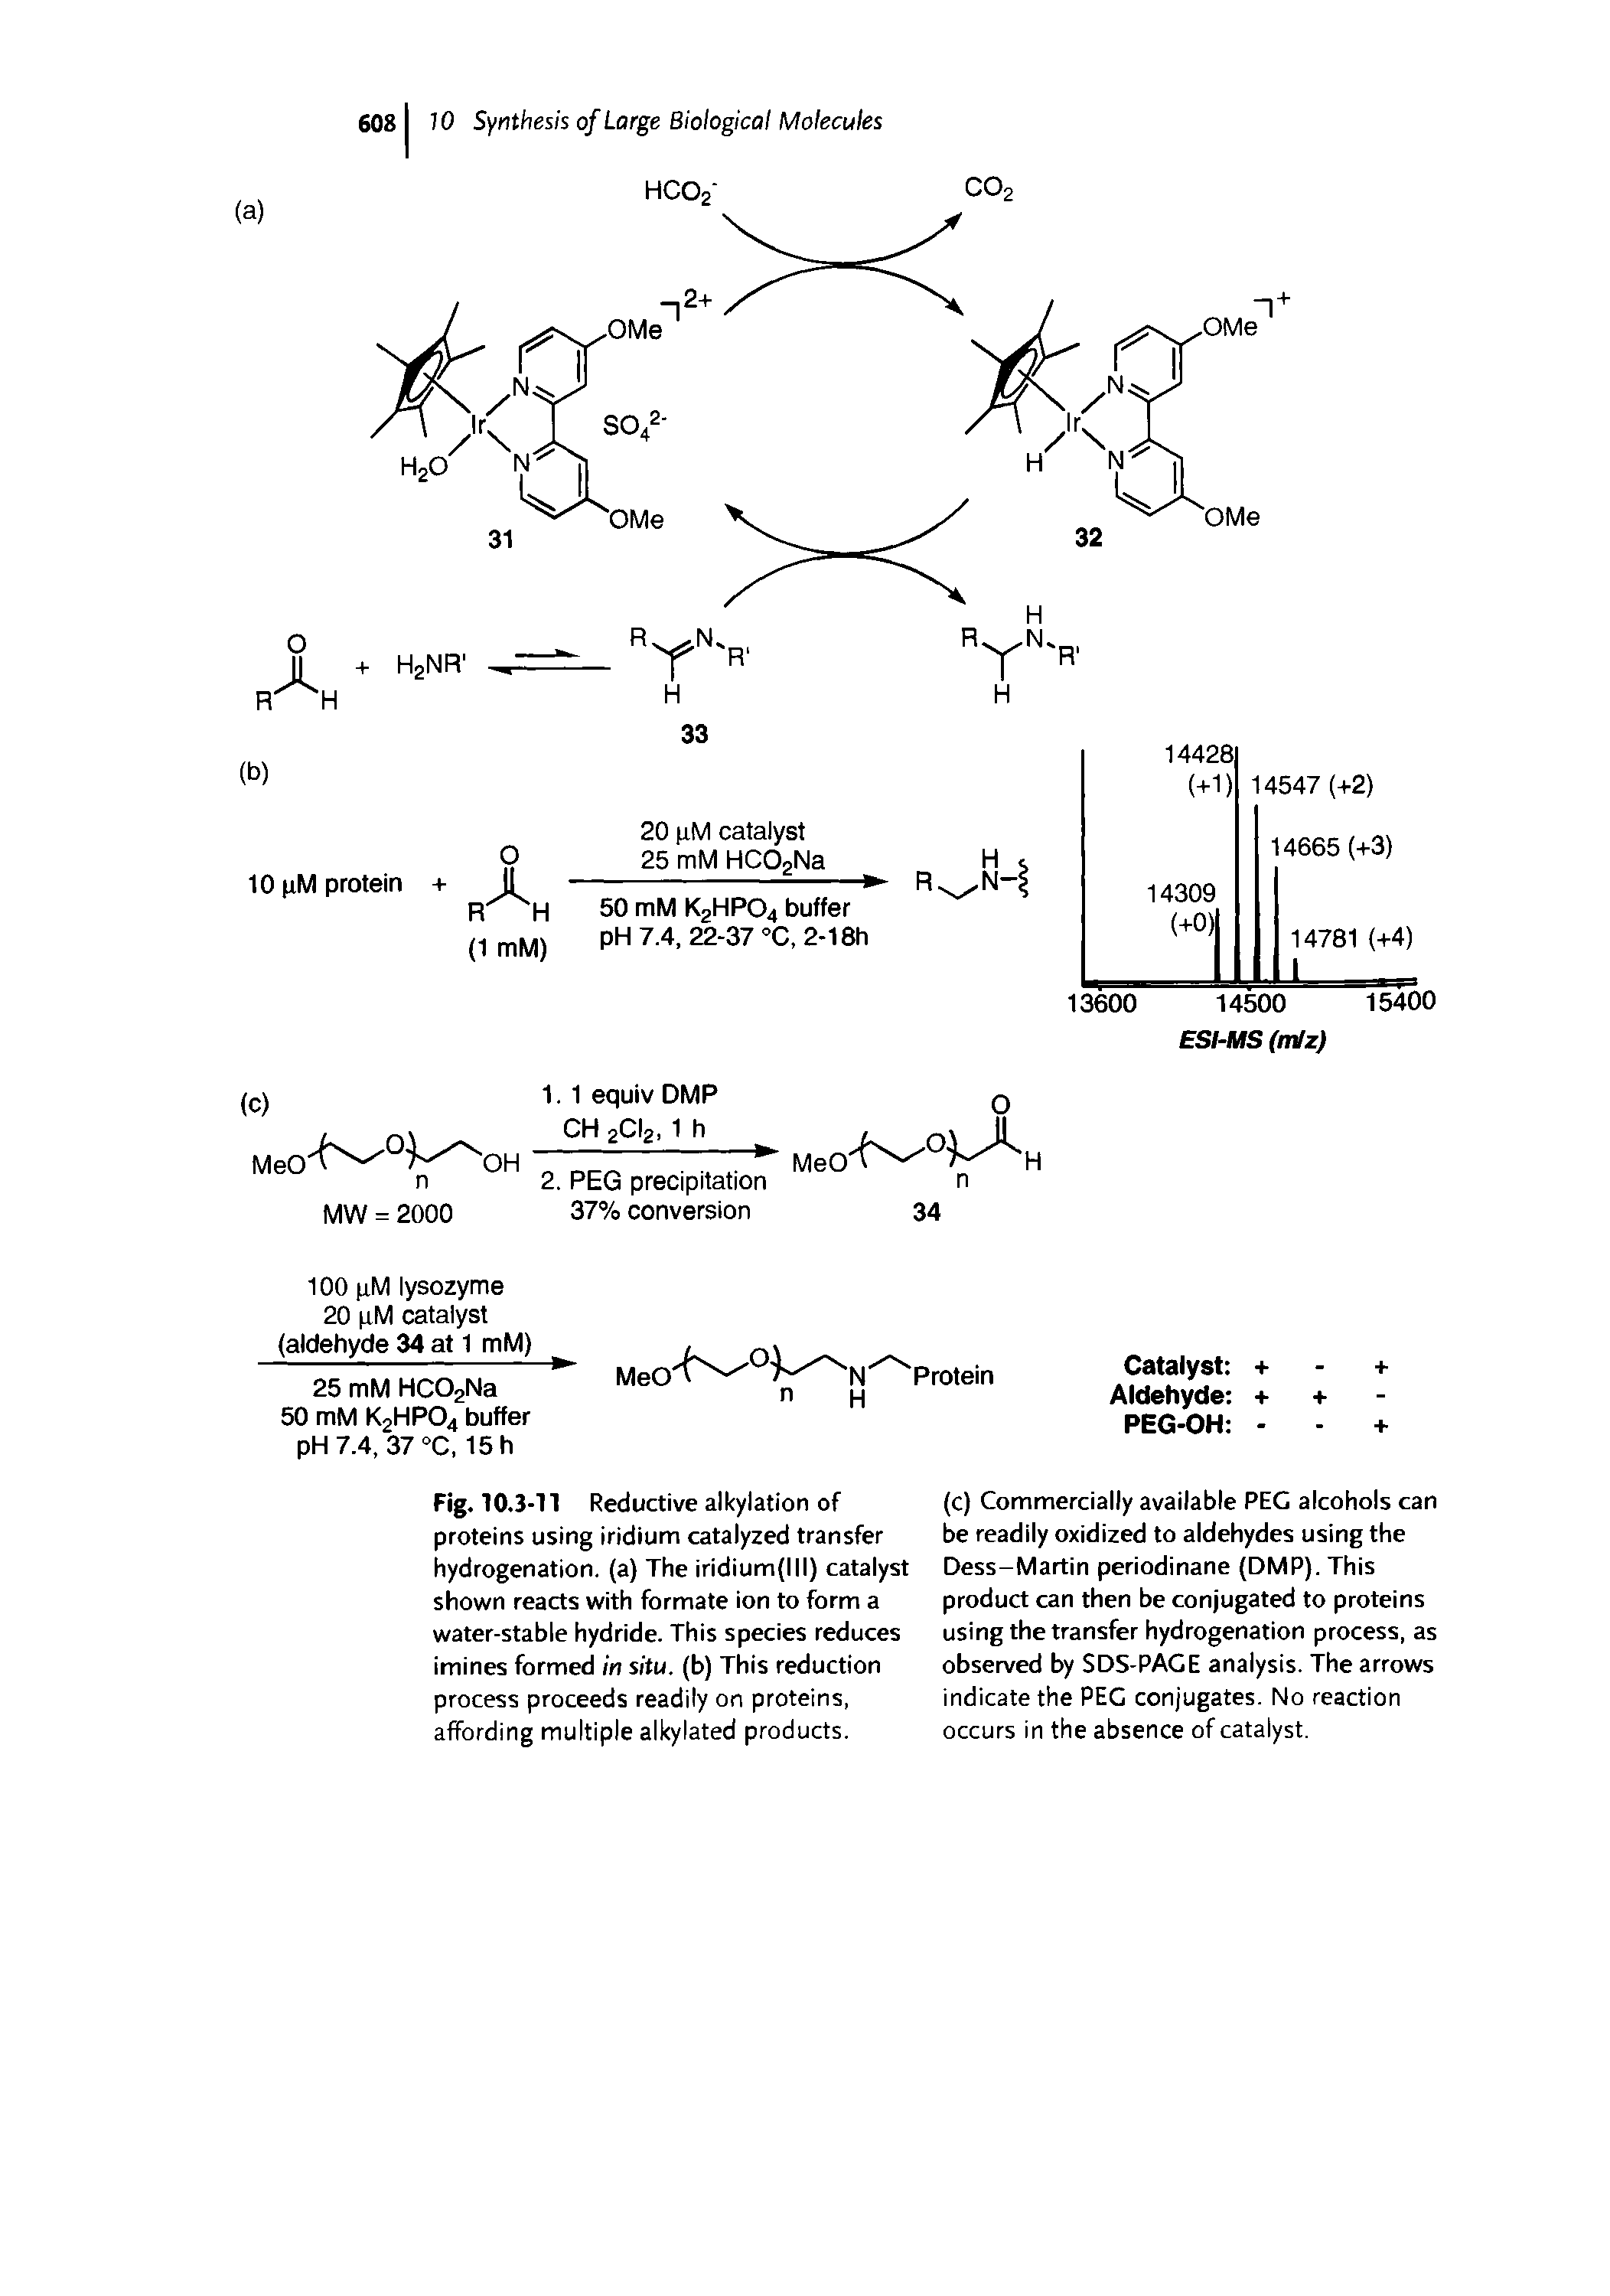 Fig. 10.3-11 Reductive alkylation of proteins using iridium catalyzed transfer hydrogenation, (a) The iridium(lll) catalyst shown reacts with formate ion to form a water-stable hydride. This species reduces imines formed in situ, (b) This reduction process proceeds readily on proteins, affording multiple alkylated products.